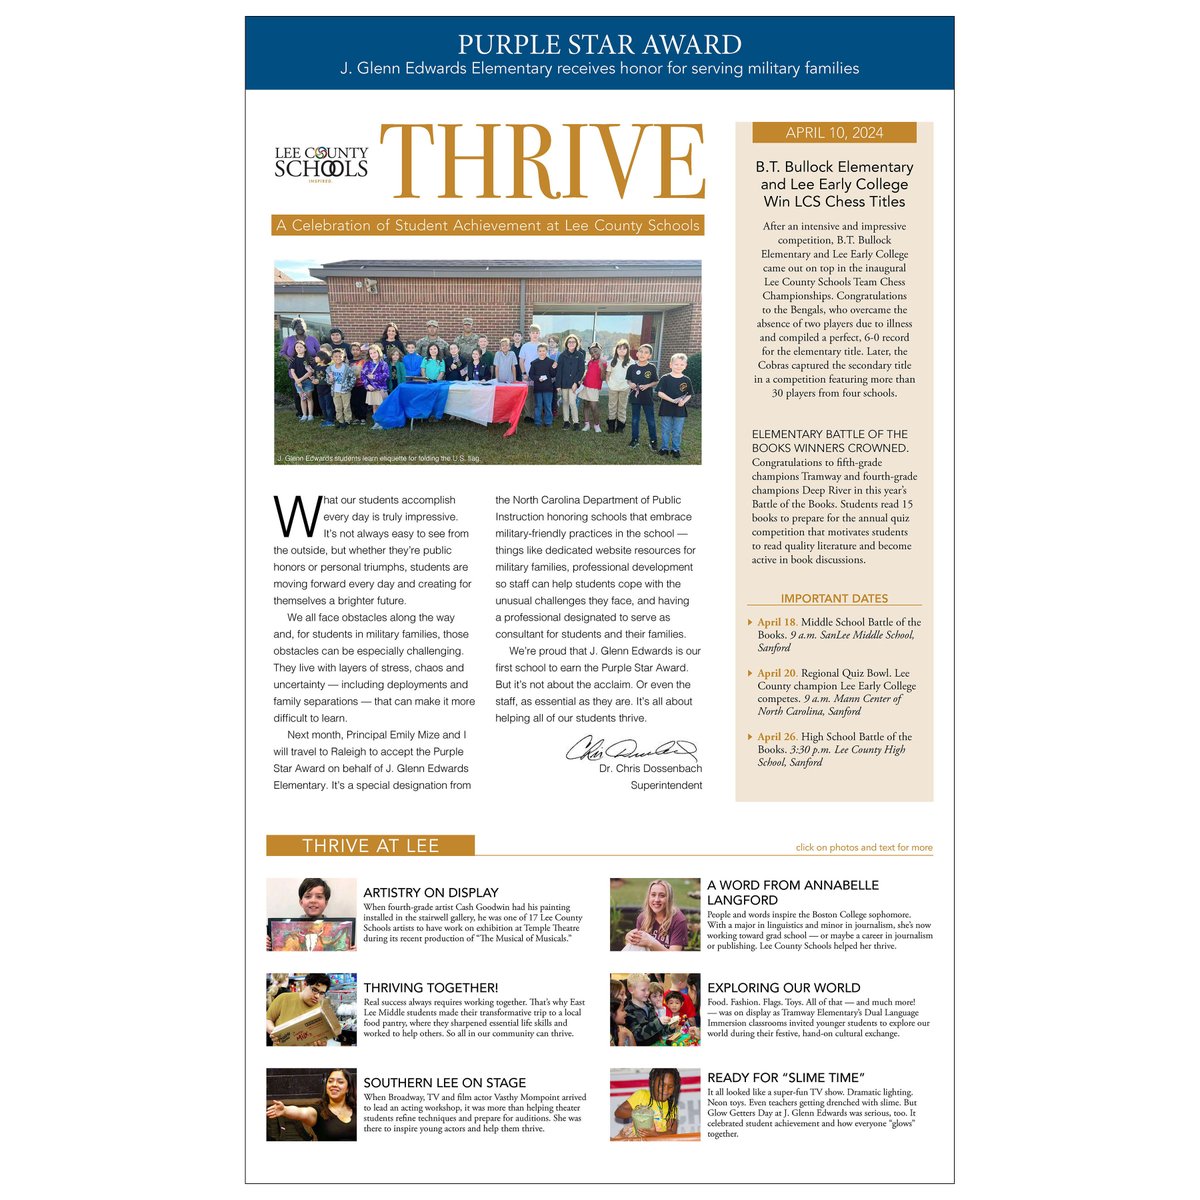 Don’t miss our 10th issue of THRIVE and TRIUNFAR, an occasional update celebrating student achievement at Lee County Schools! THRIVE (English) bit.ly/3J9B8SB TRIUNFAR (Spanish) bit.ly/4cOuiPZ ▶️ And follow the embedded links for even more. #LCSthrive